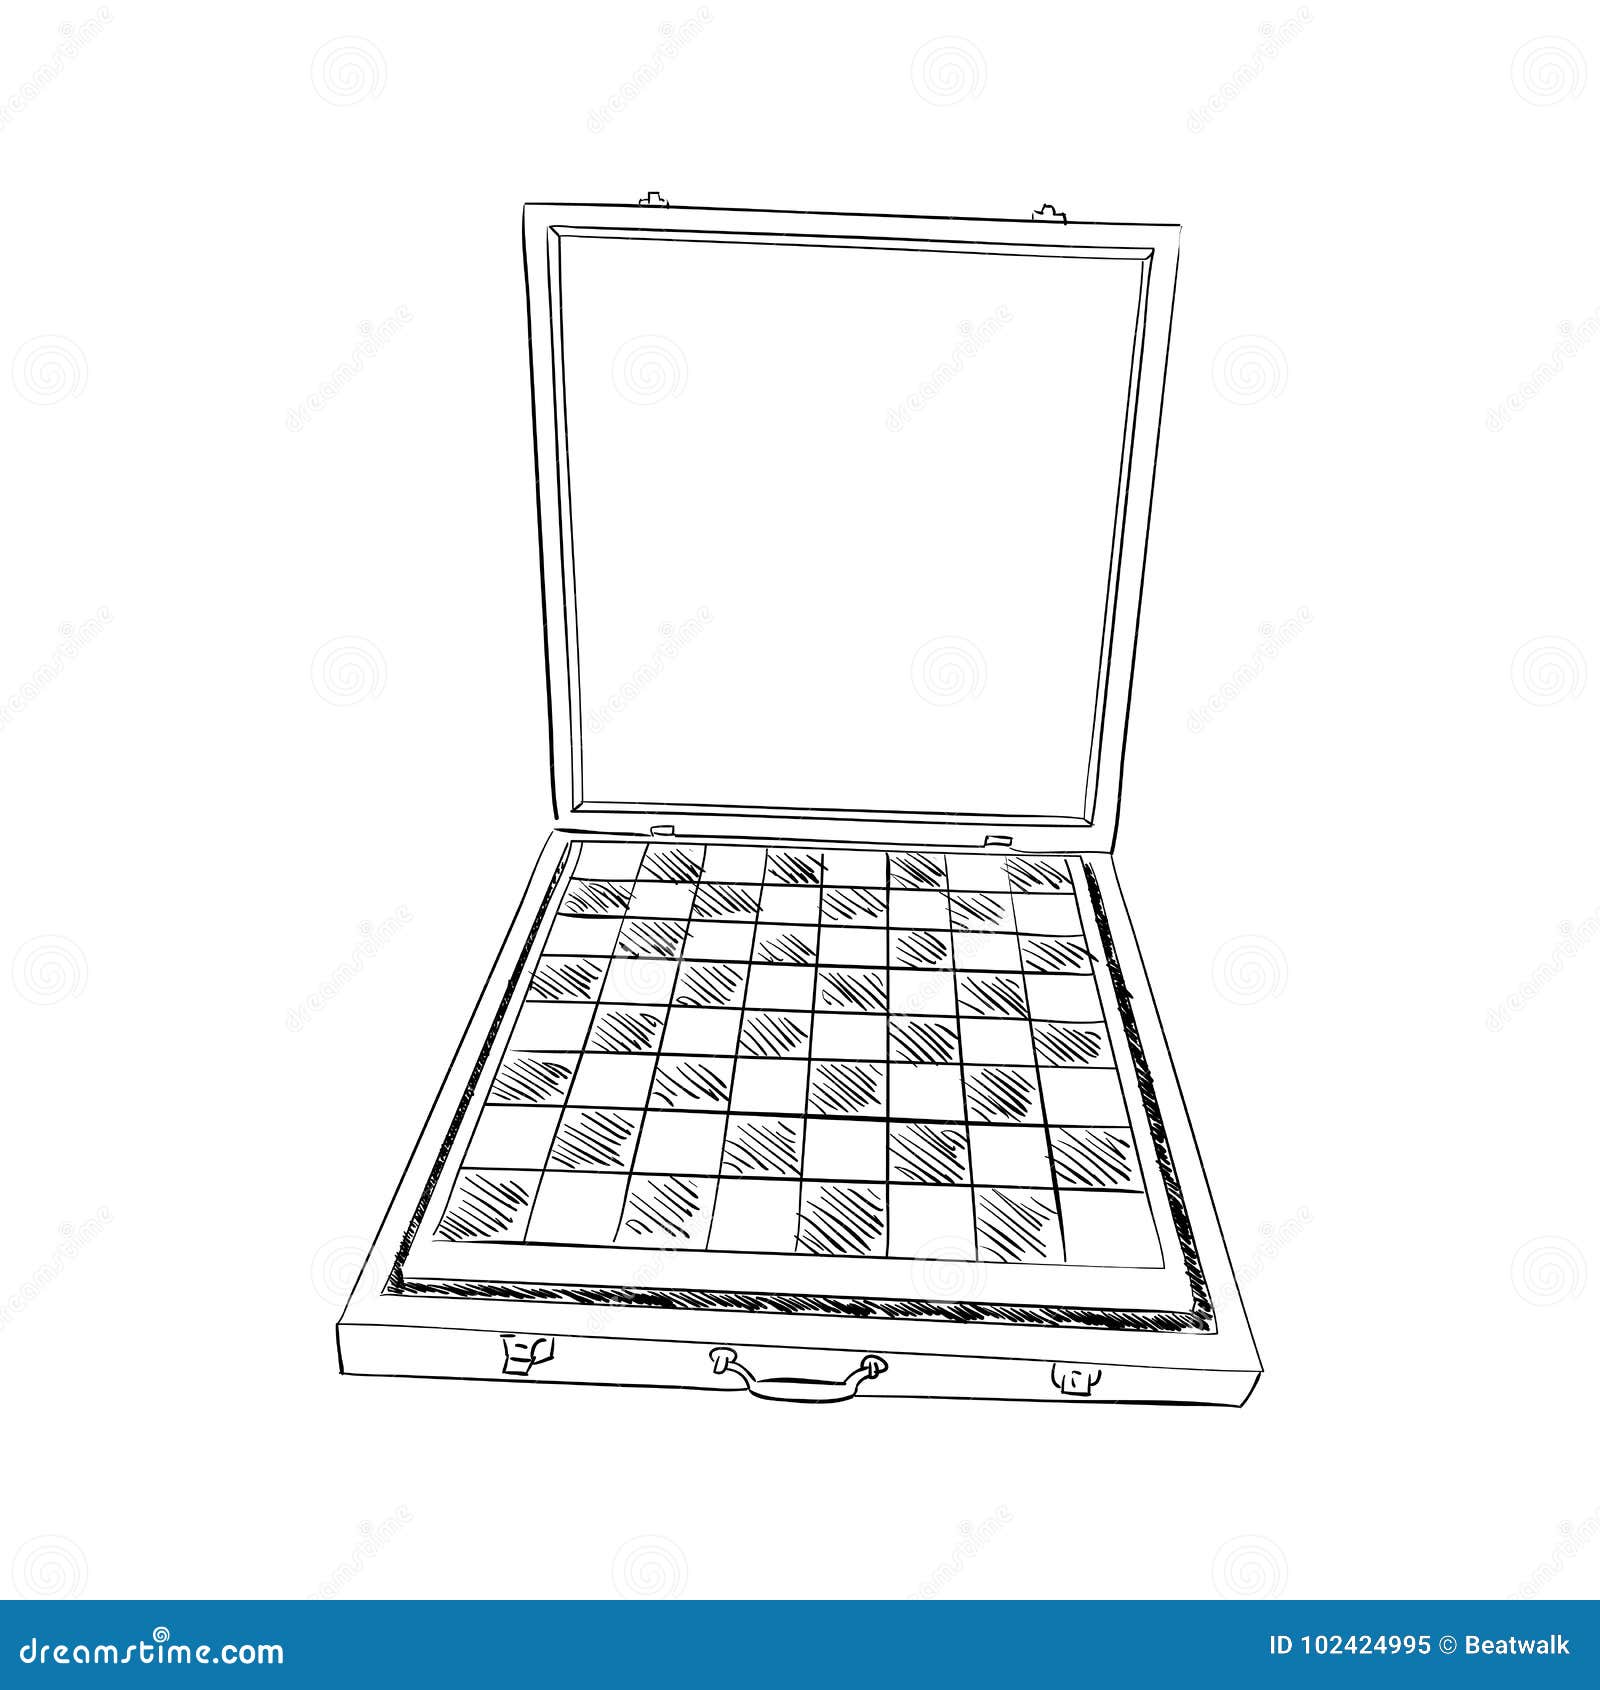 3600 Chess Boards Drawing Stock Photos Pictures  RoyaltyFree Images   iStock